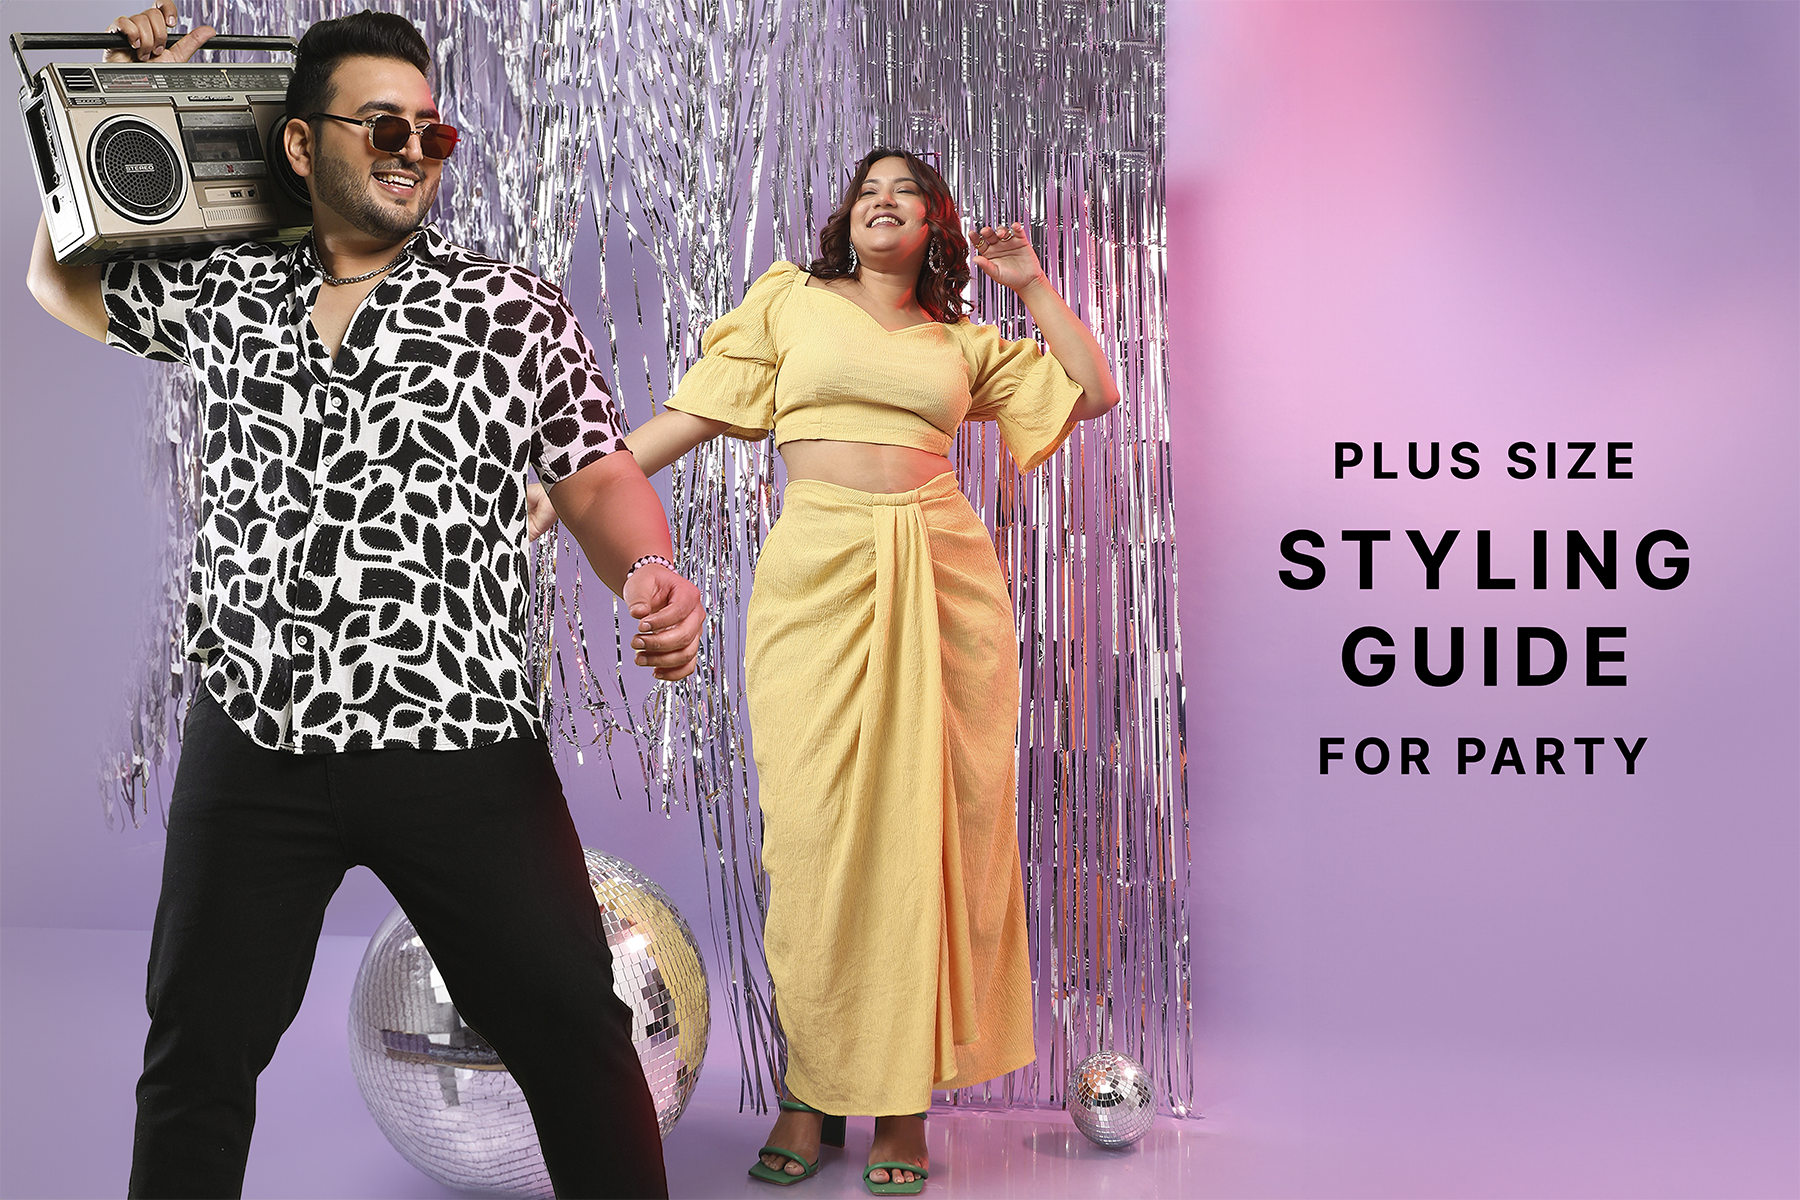 A Gender-Inclusive Plus Size Styling Guide For Parties